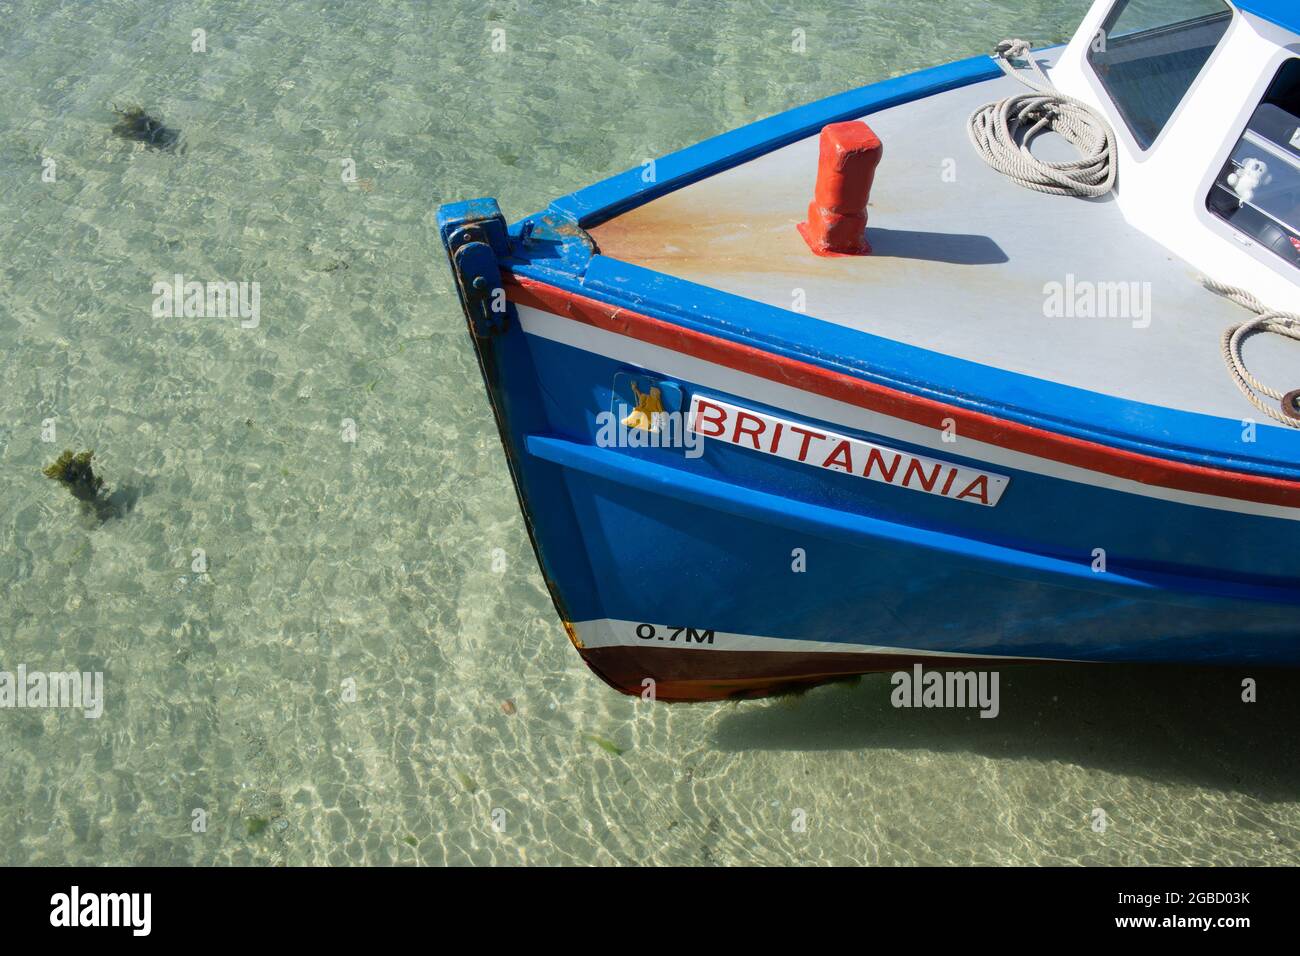 Britannia boat bow in clear water, Isles of Scilly, Cornwall, England UK. Stock Photo